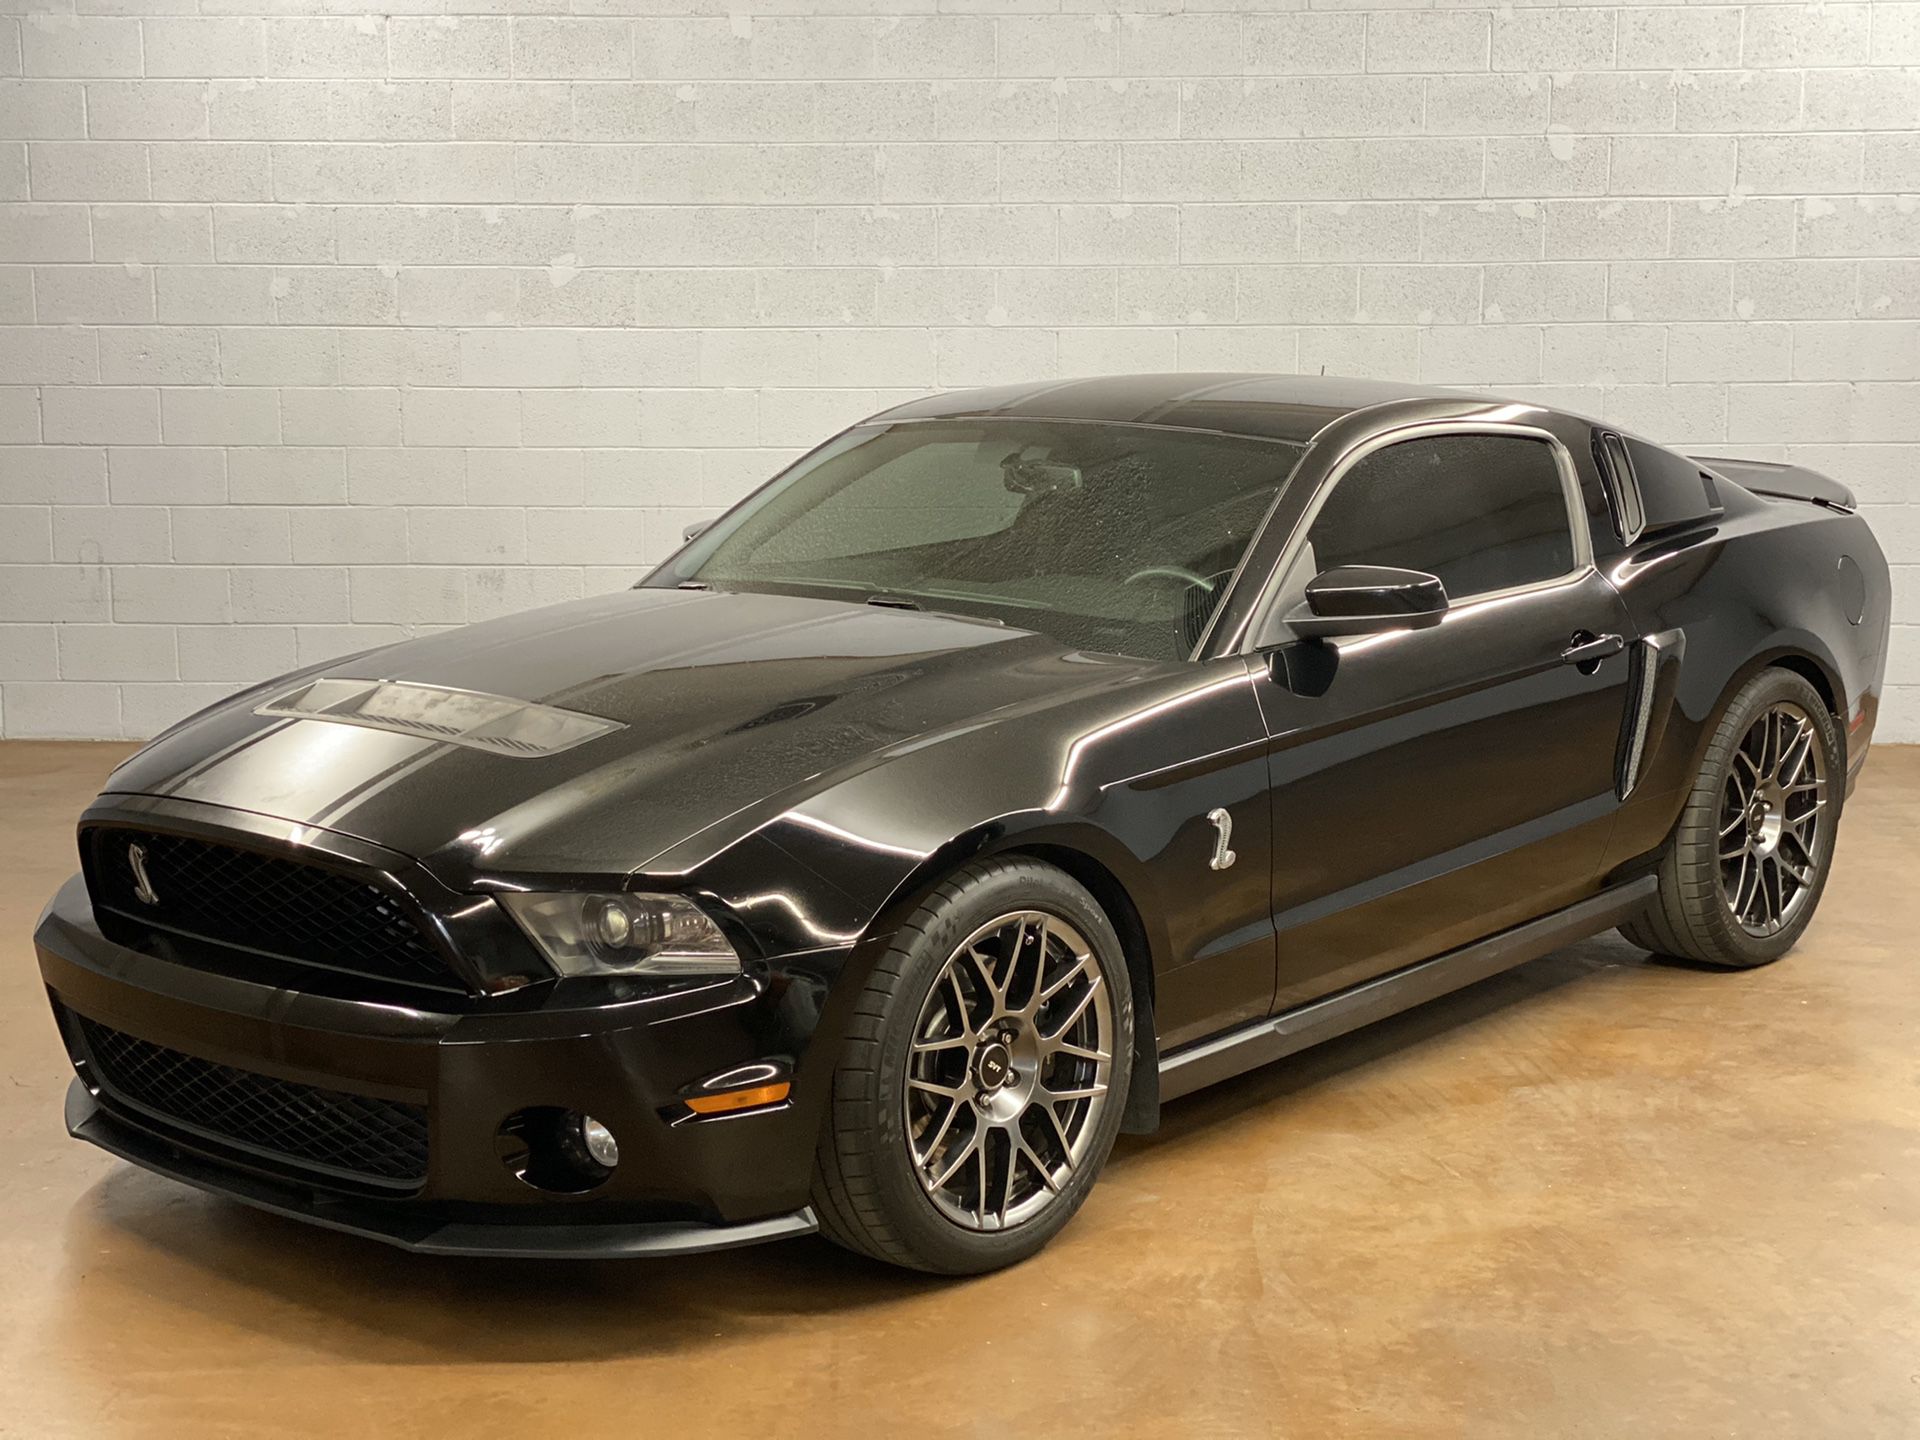 2012 Ford Shelby GT 500 (Payments Available)